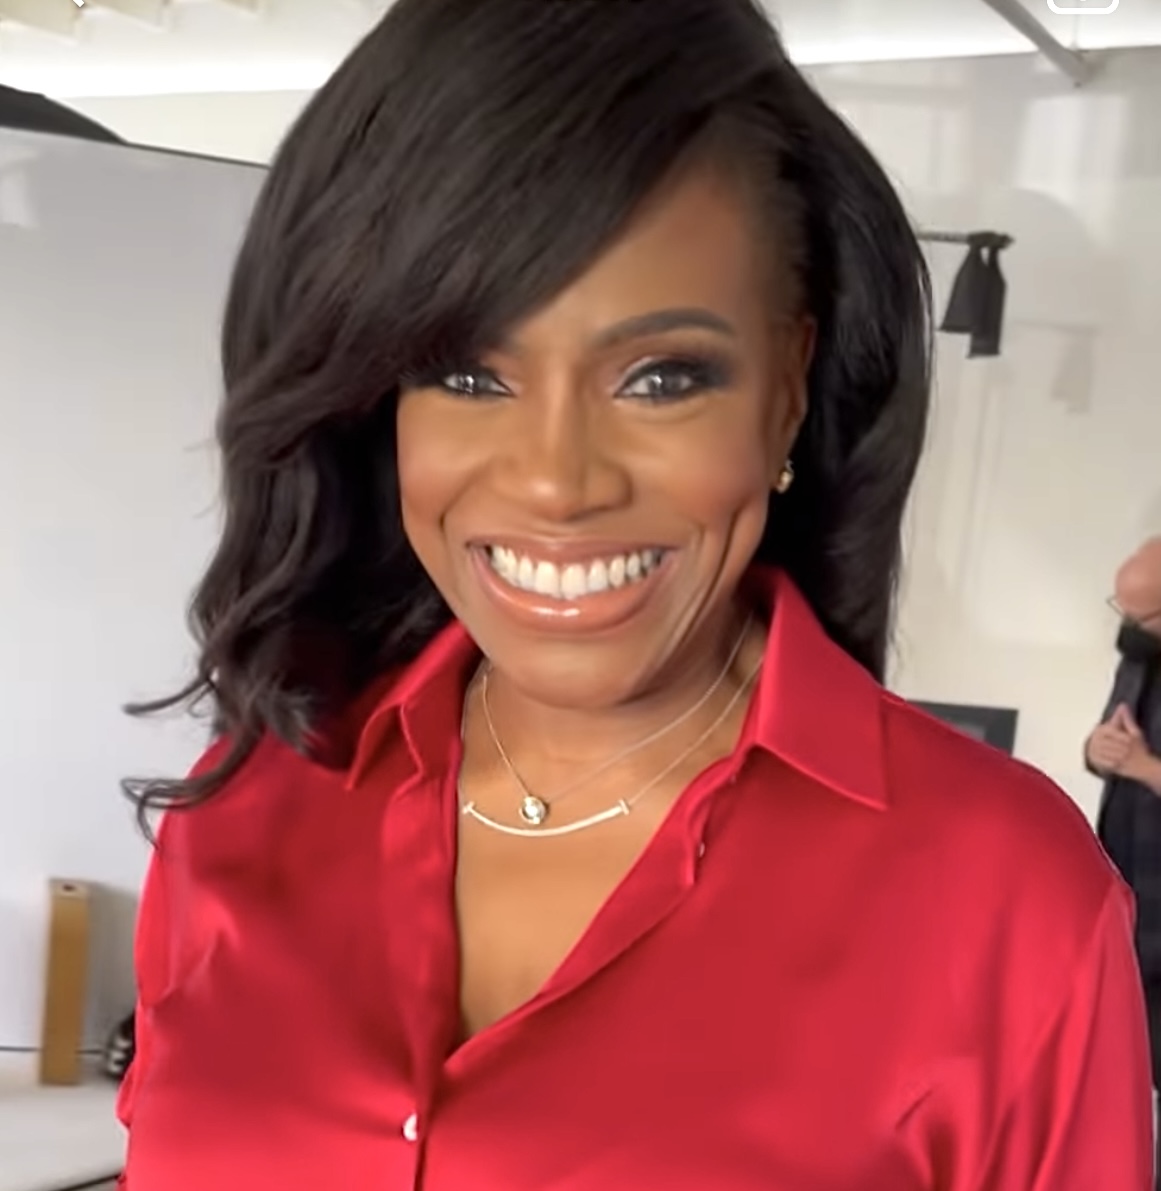 Sheryl Lee Ralph Performs 'Lift Every Voice and Sing' at Super Bowl 2023